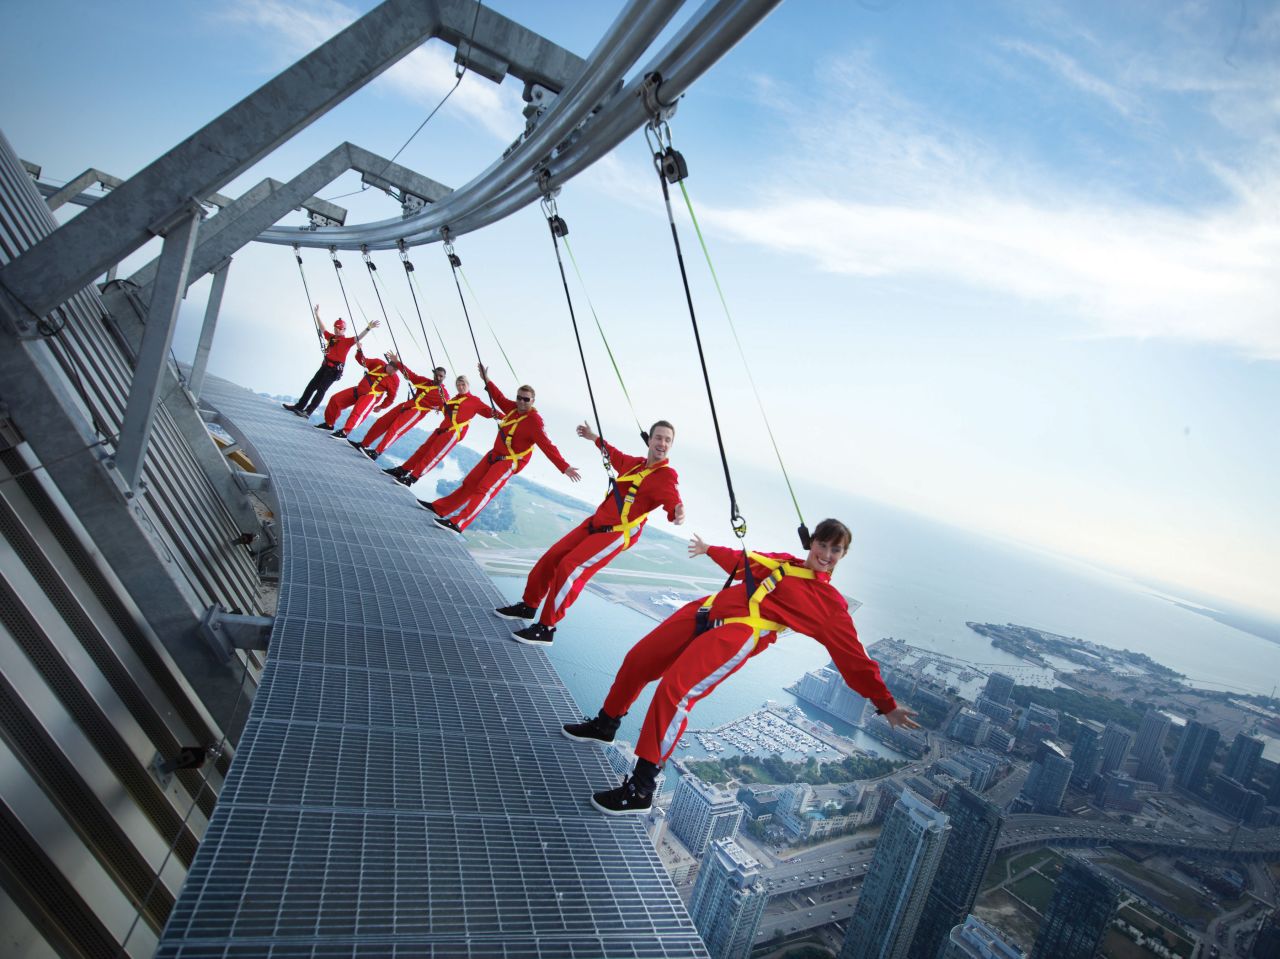 Located on the roof of the CN Tower's restaurant at a height of 1,168 feet (356 meters), the EdgeWalk in Toronto allows visitors to slip into climbing harnesses and walk around the edge of Canada's tallest structure. There's also a glass floor 1,122 feet (342 meters) above ground level.